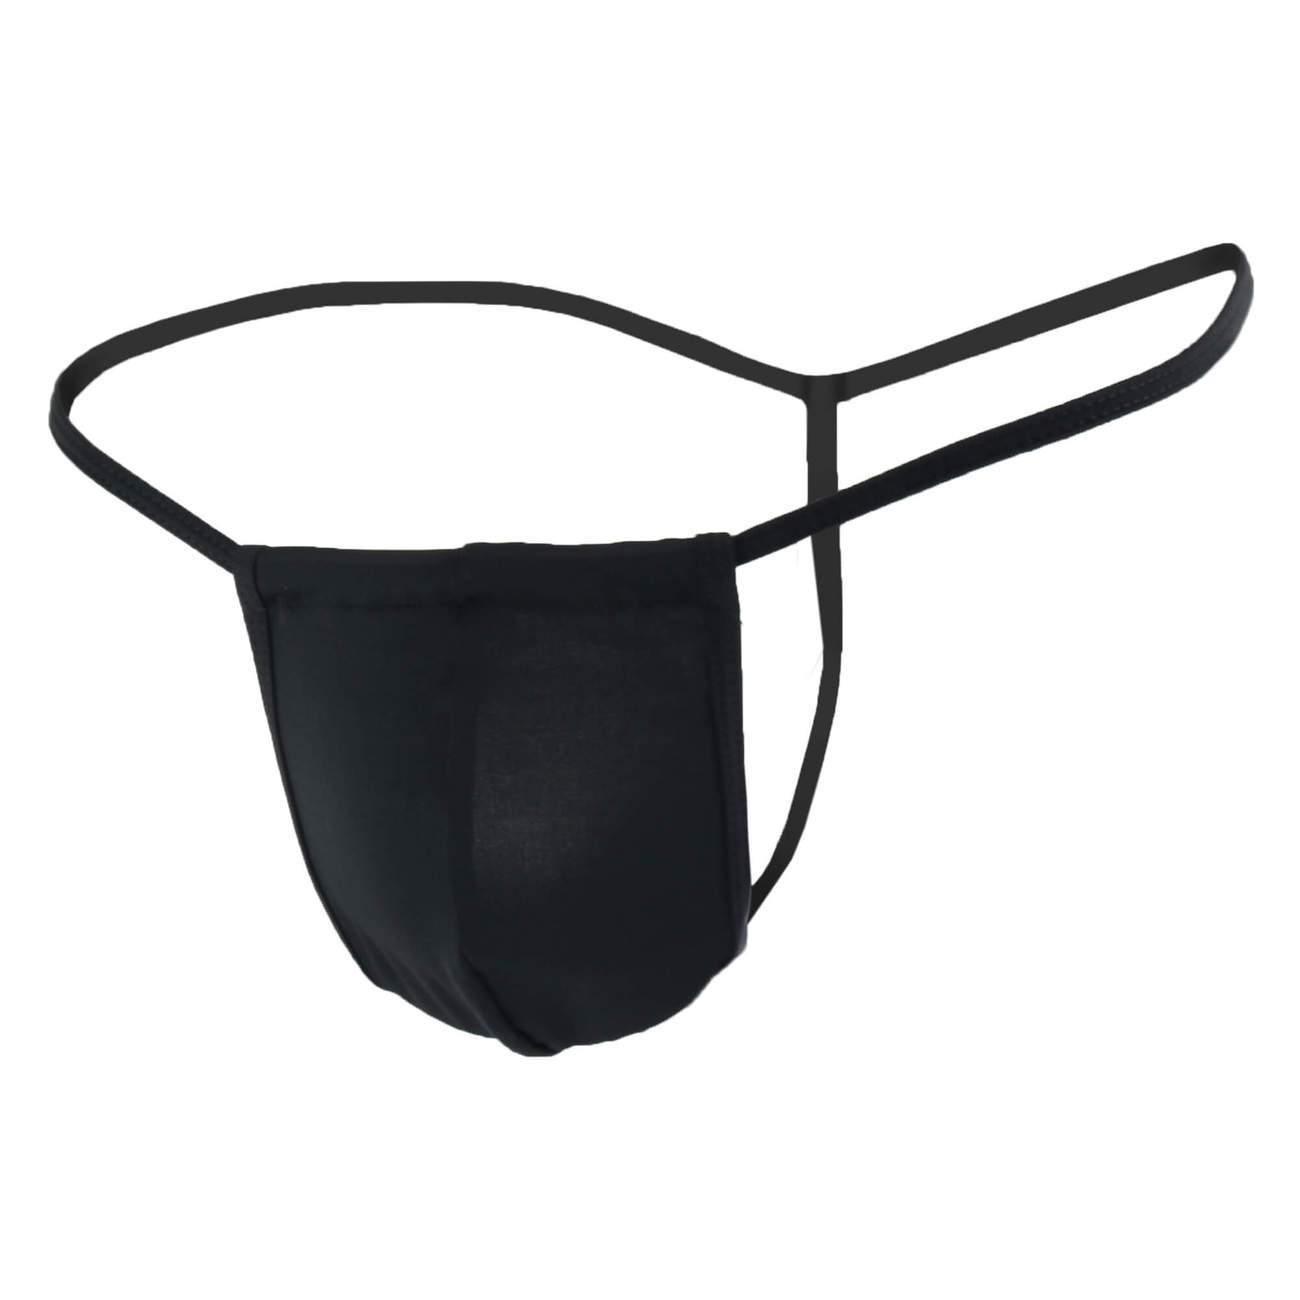 image of product,Thong - SEXYEONE